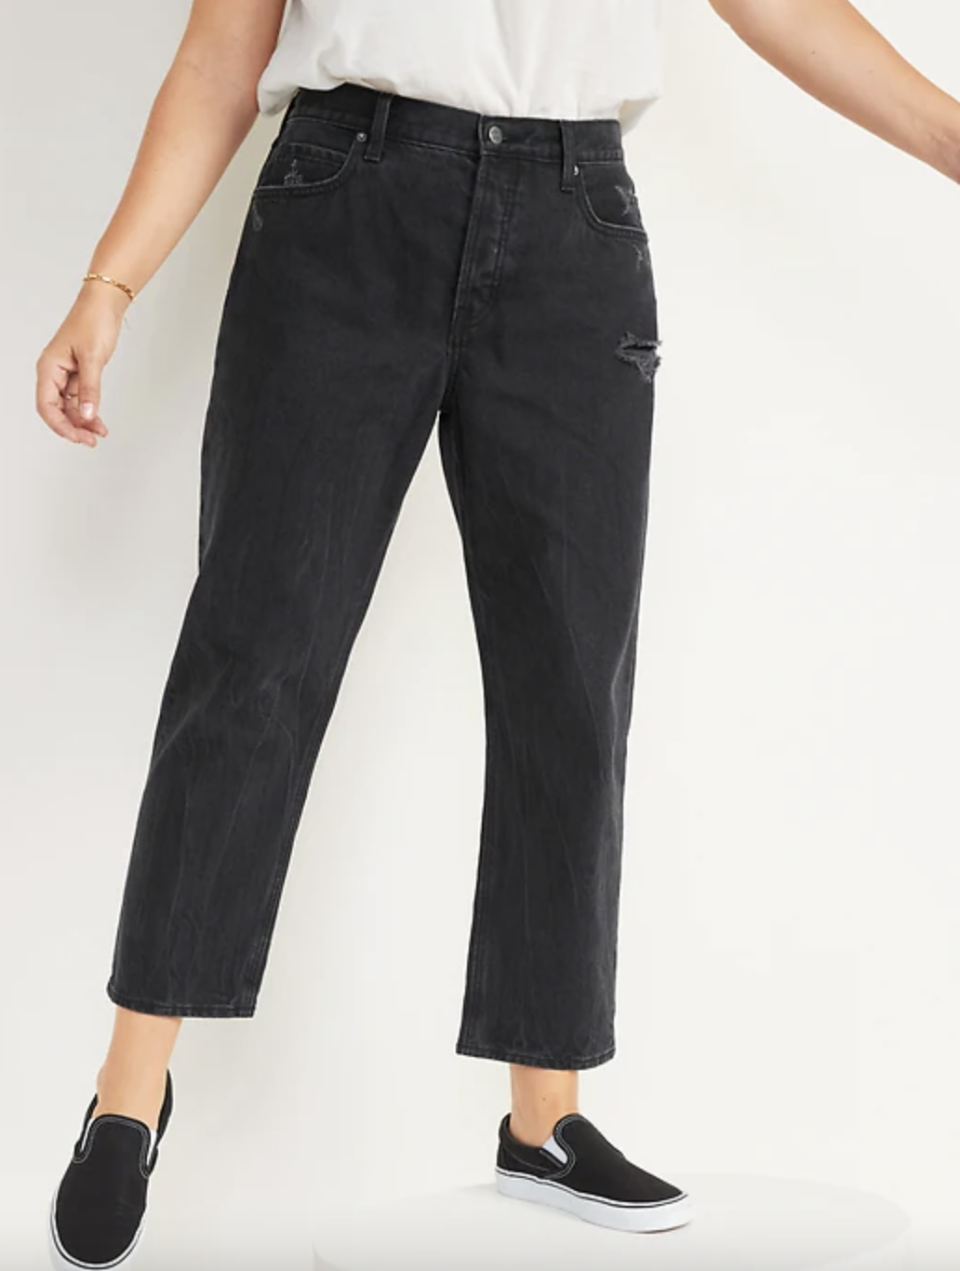 model wearing black High-Waisted Slouchy Straight Cropped Distressed Jeans and black slip-on shoes